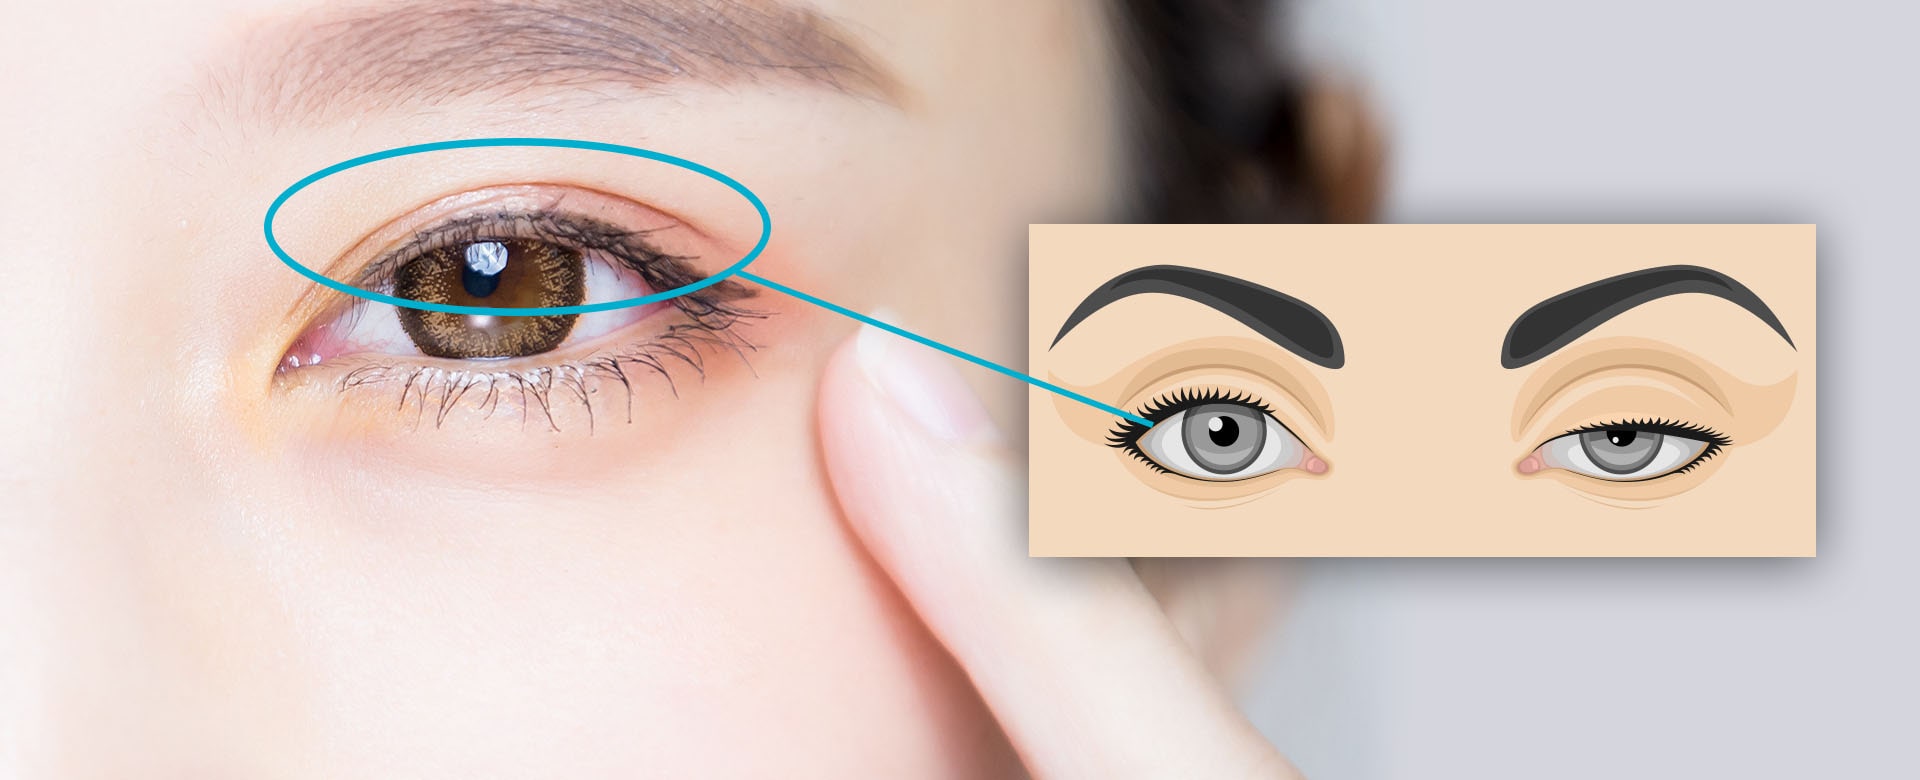 Ptosis Surgery Singapore Treatments For Droopy Eyelids For Clear